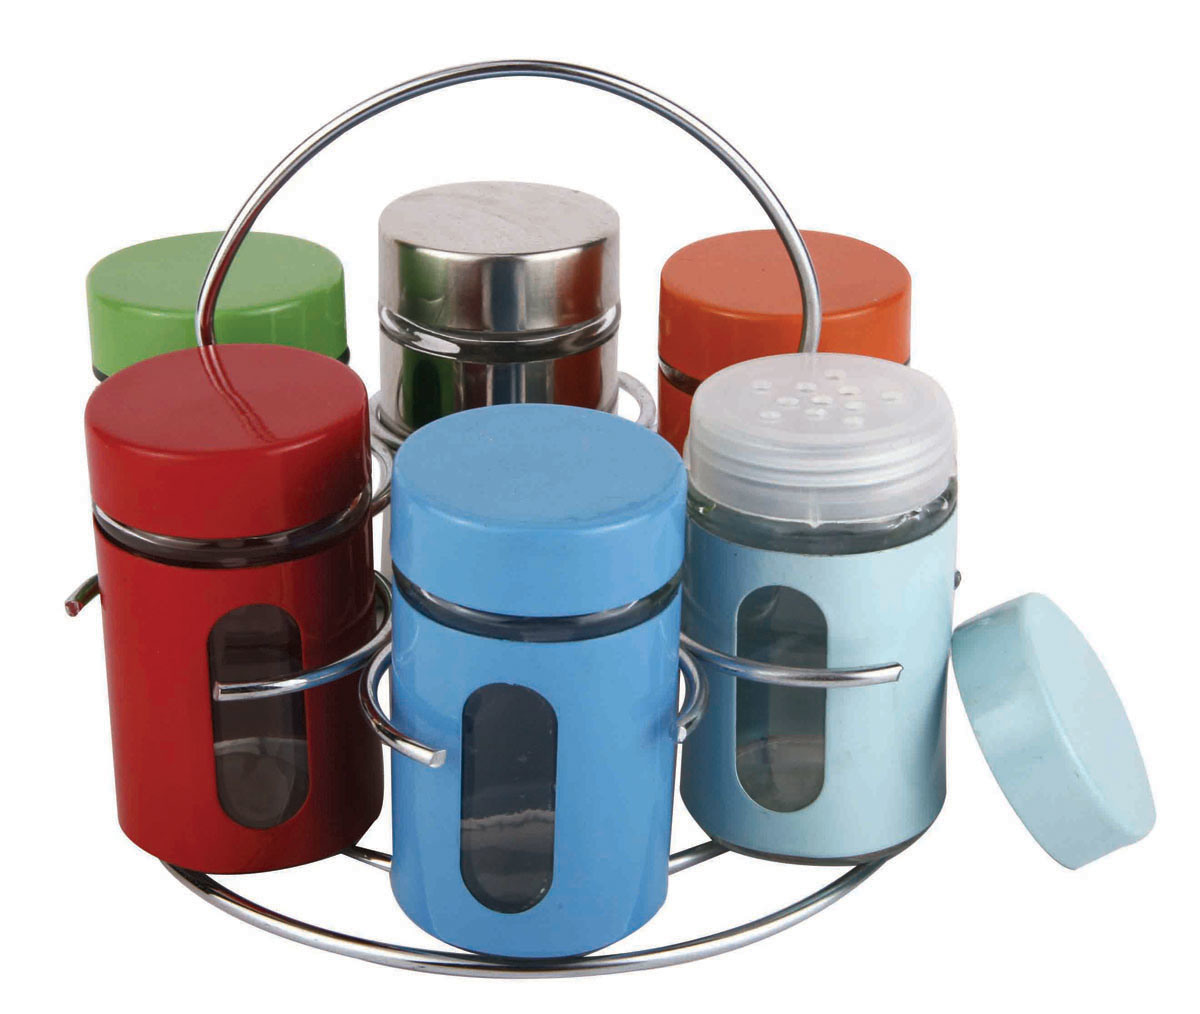 Glass Spice Jar with Grinder or Shifter